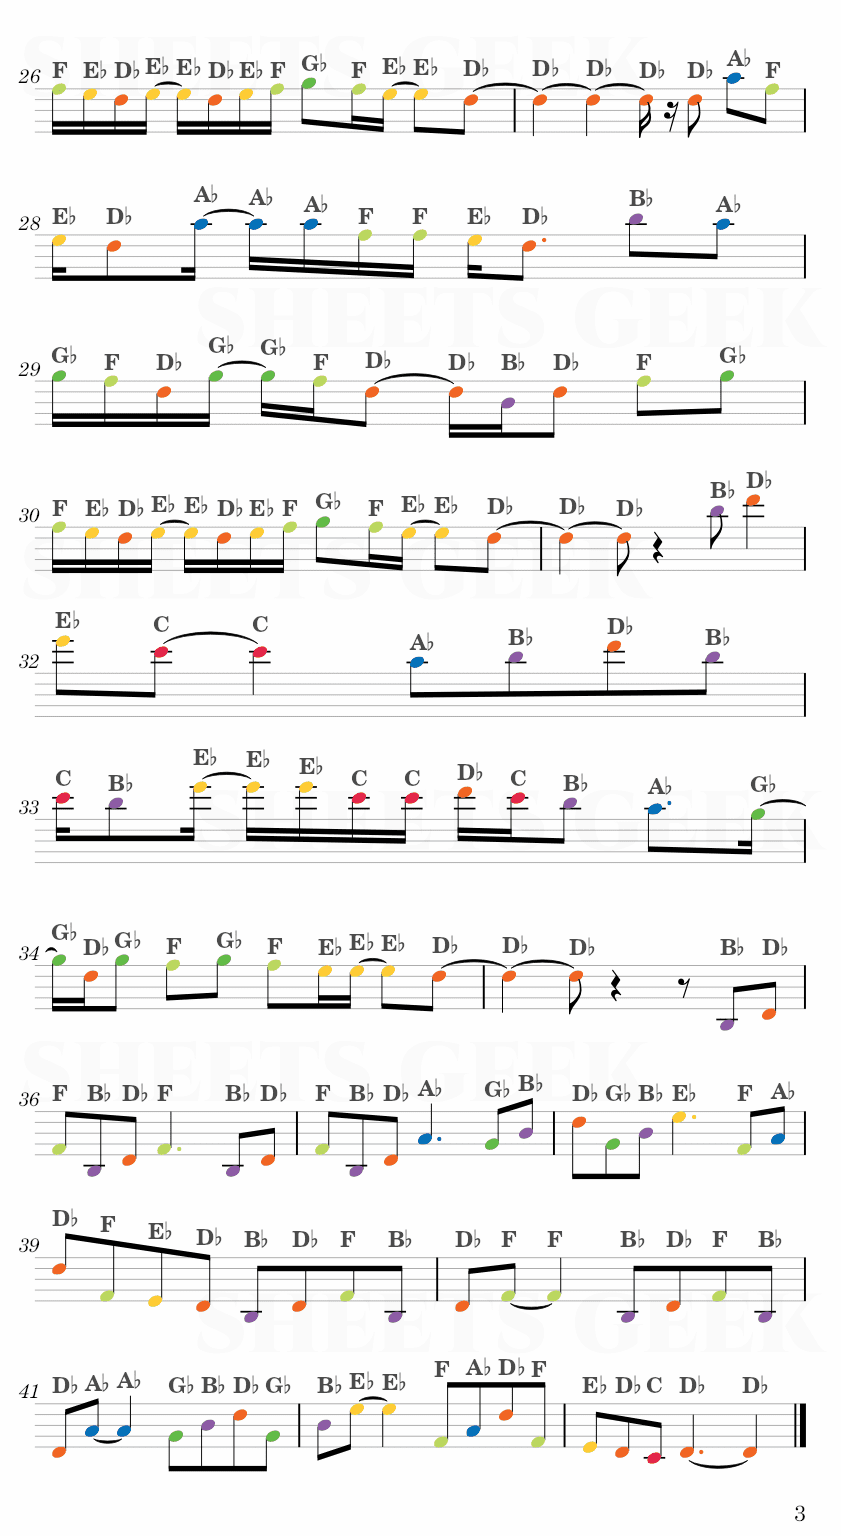 It's Been So Long - Five Nights at Freddy's 2 Song Easy Sheet Music Free for piano, keyboard, flute, violin, sax, cello page 3